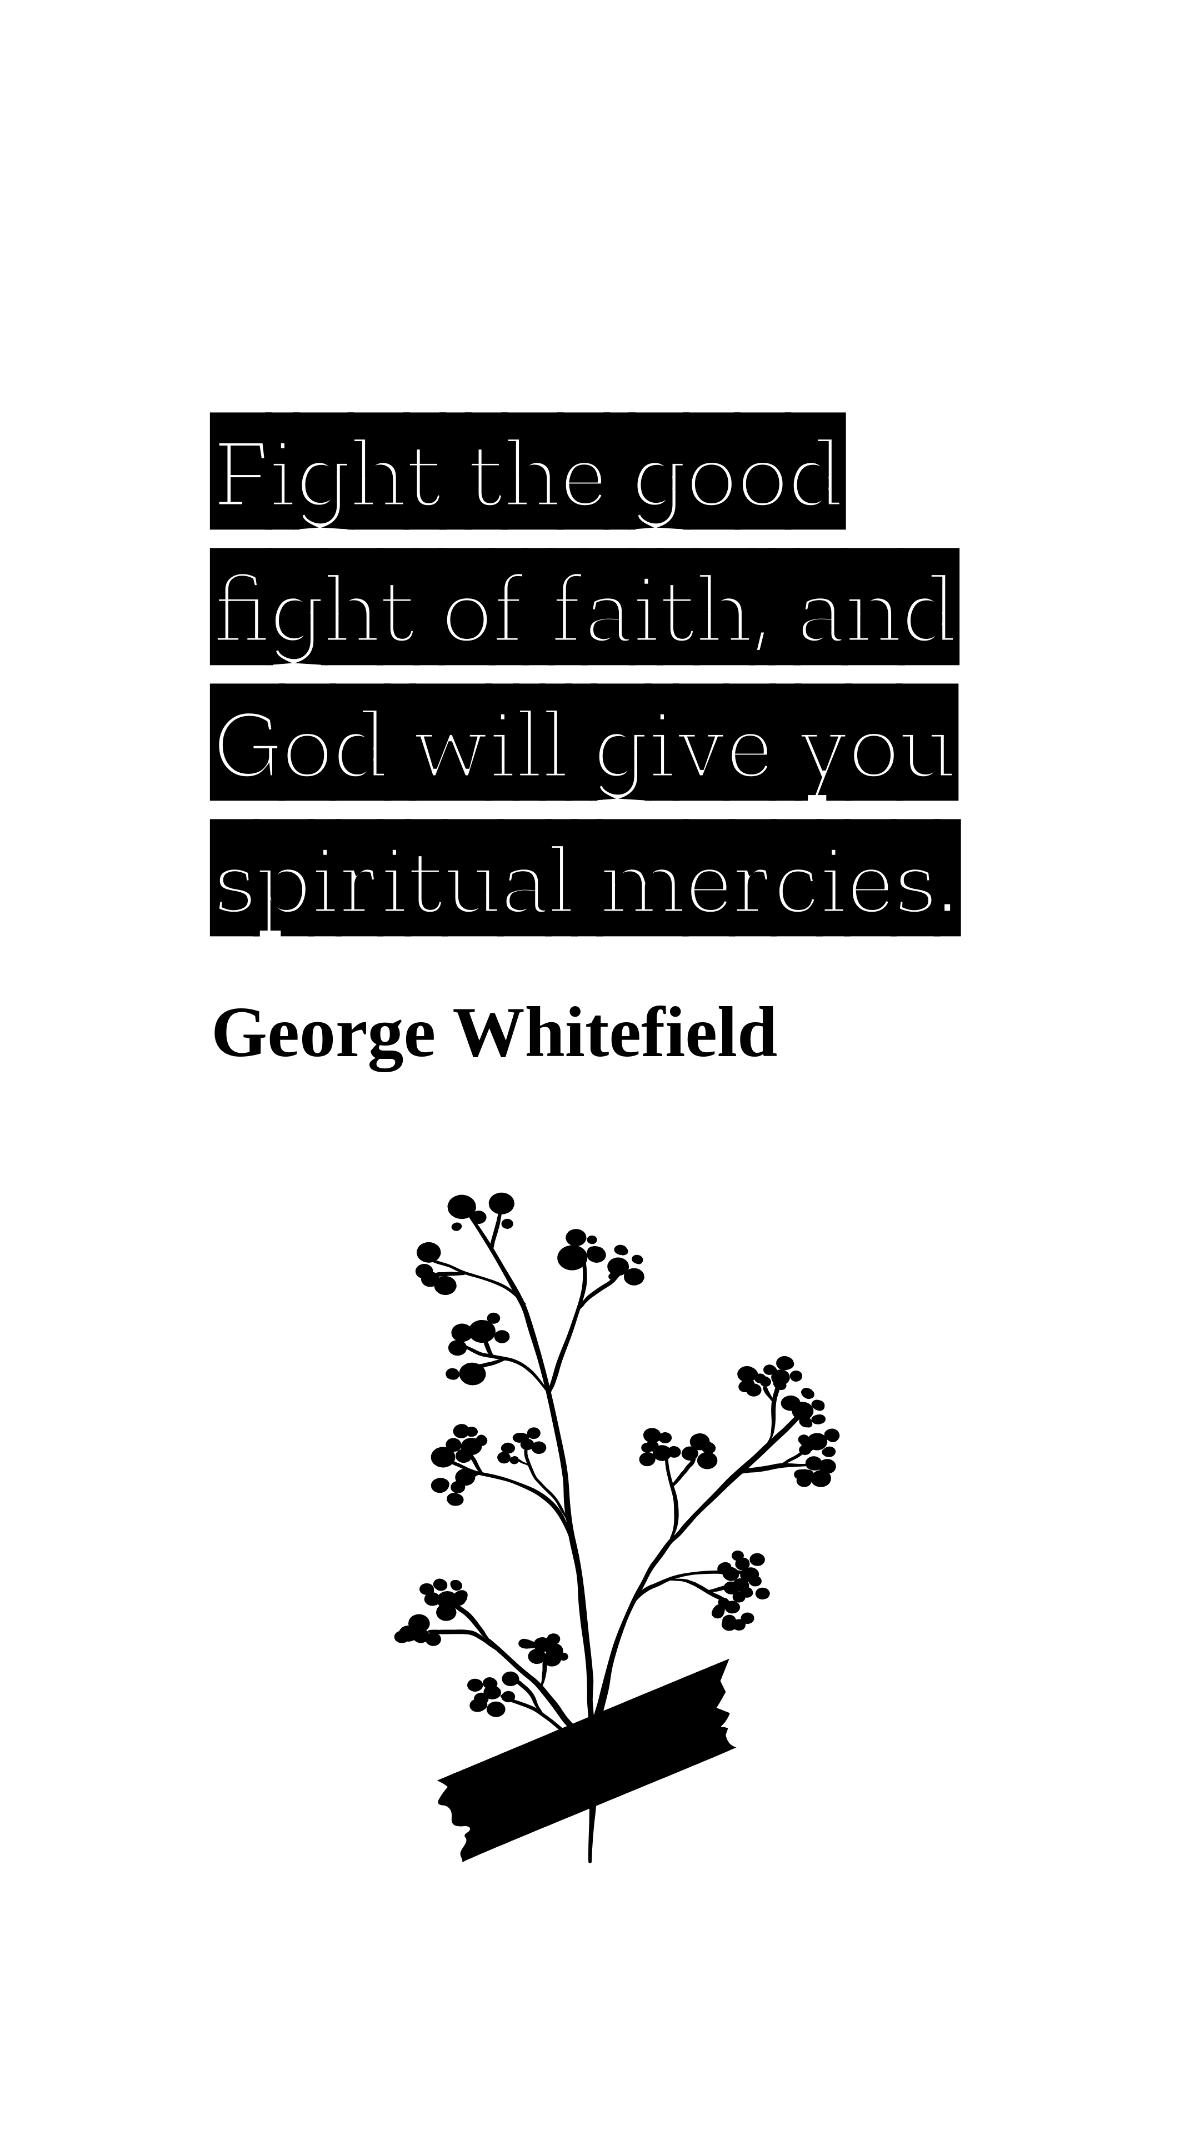 Free George Whitefield - Fight the good fight of faith, and God will give you spiritual mercies. Template